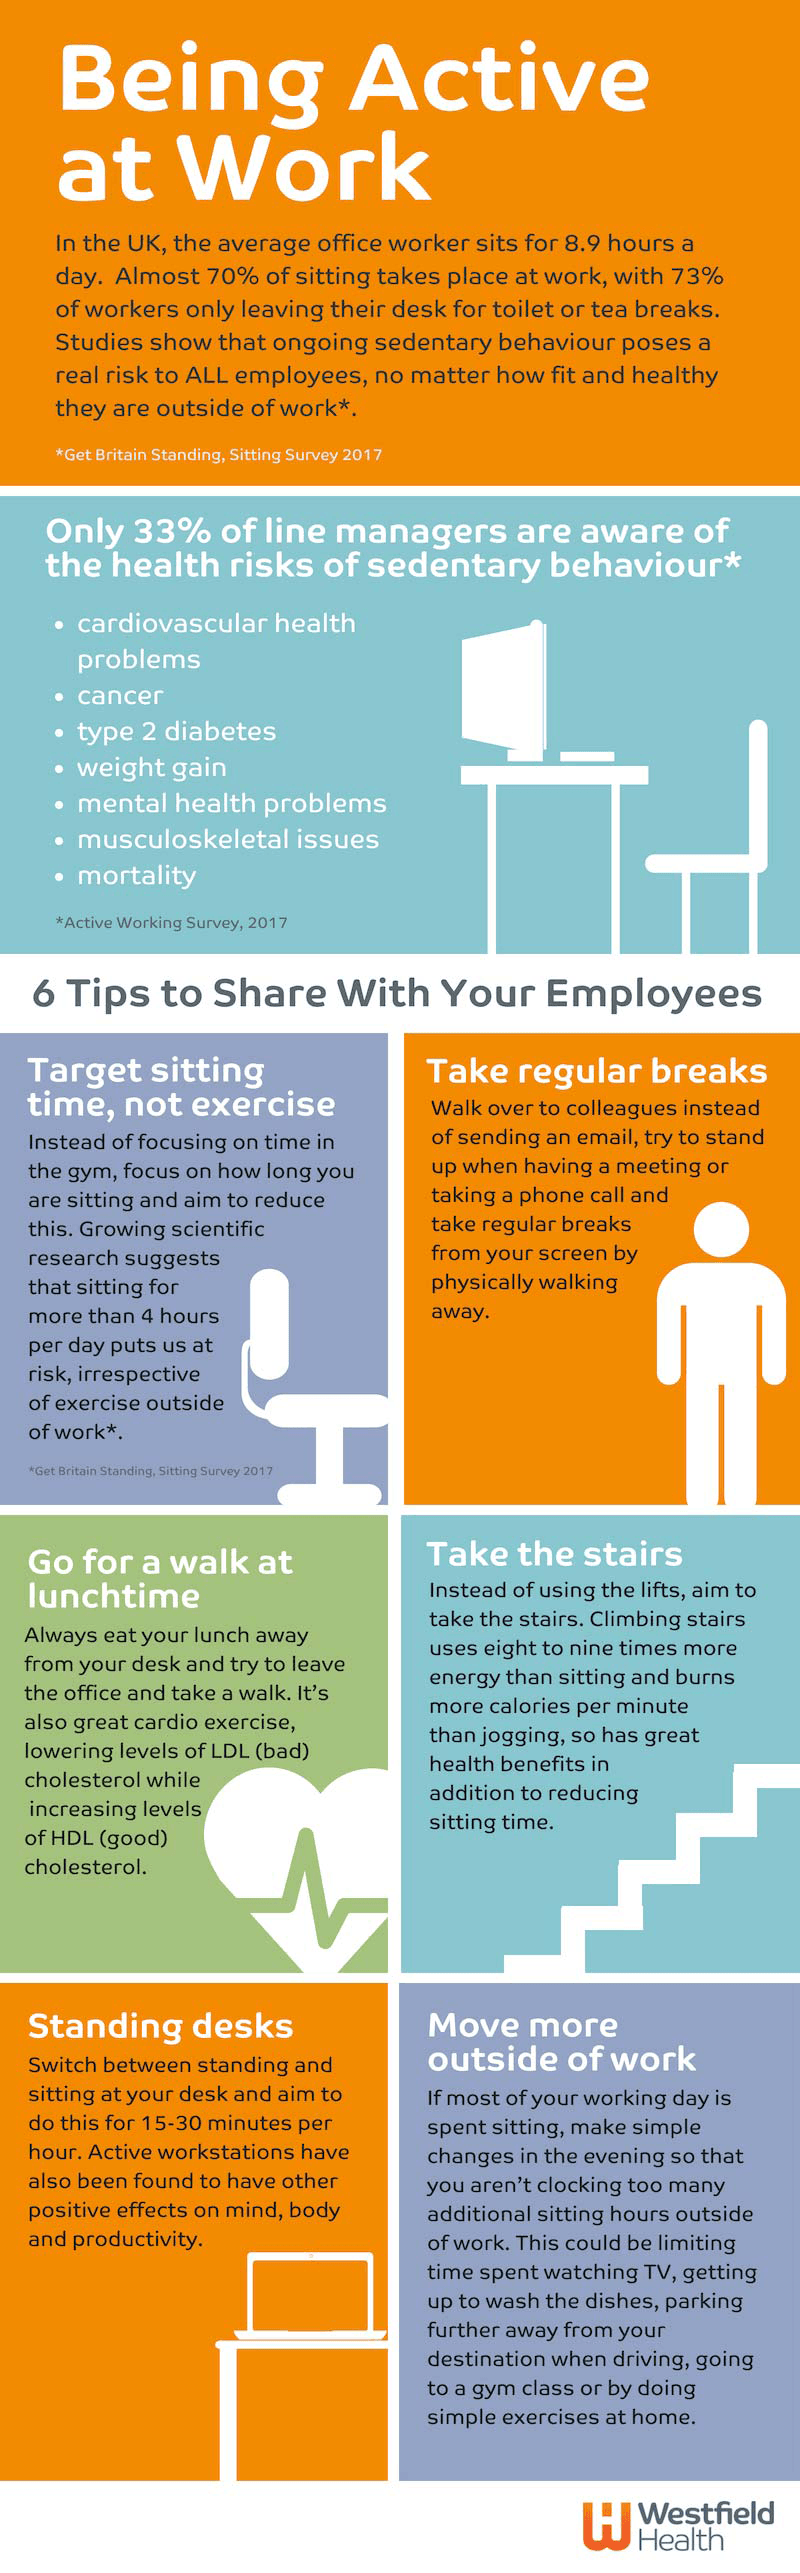 Being Active at Work Infographic